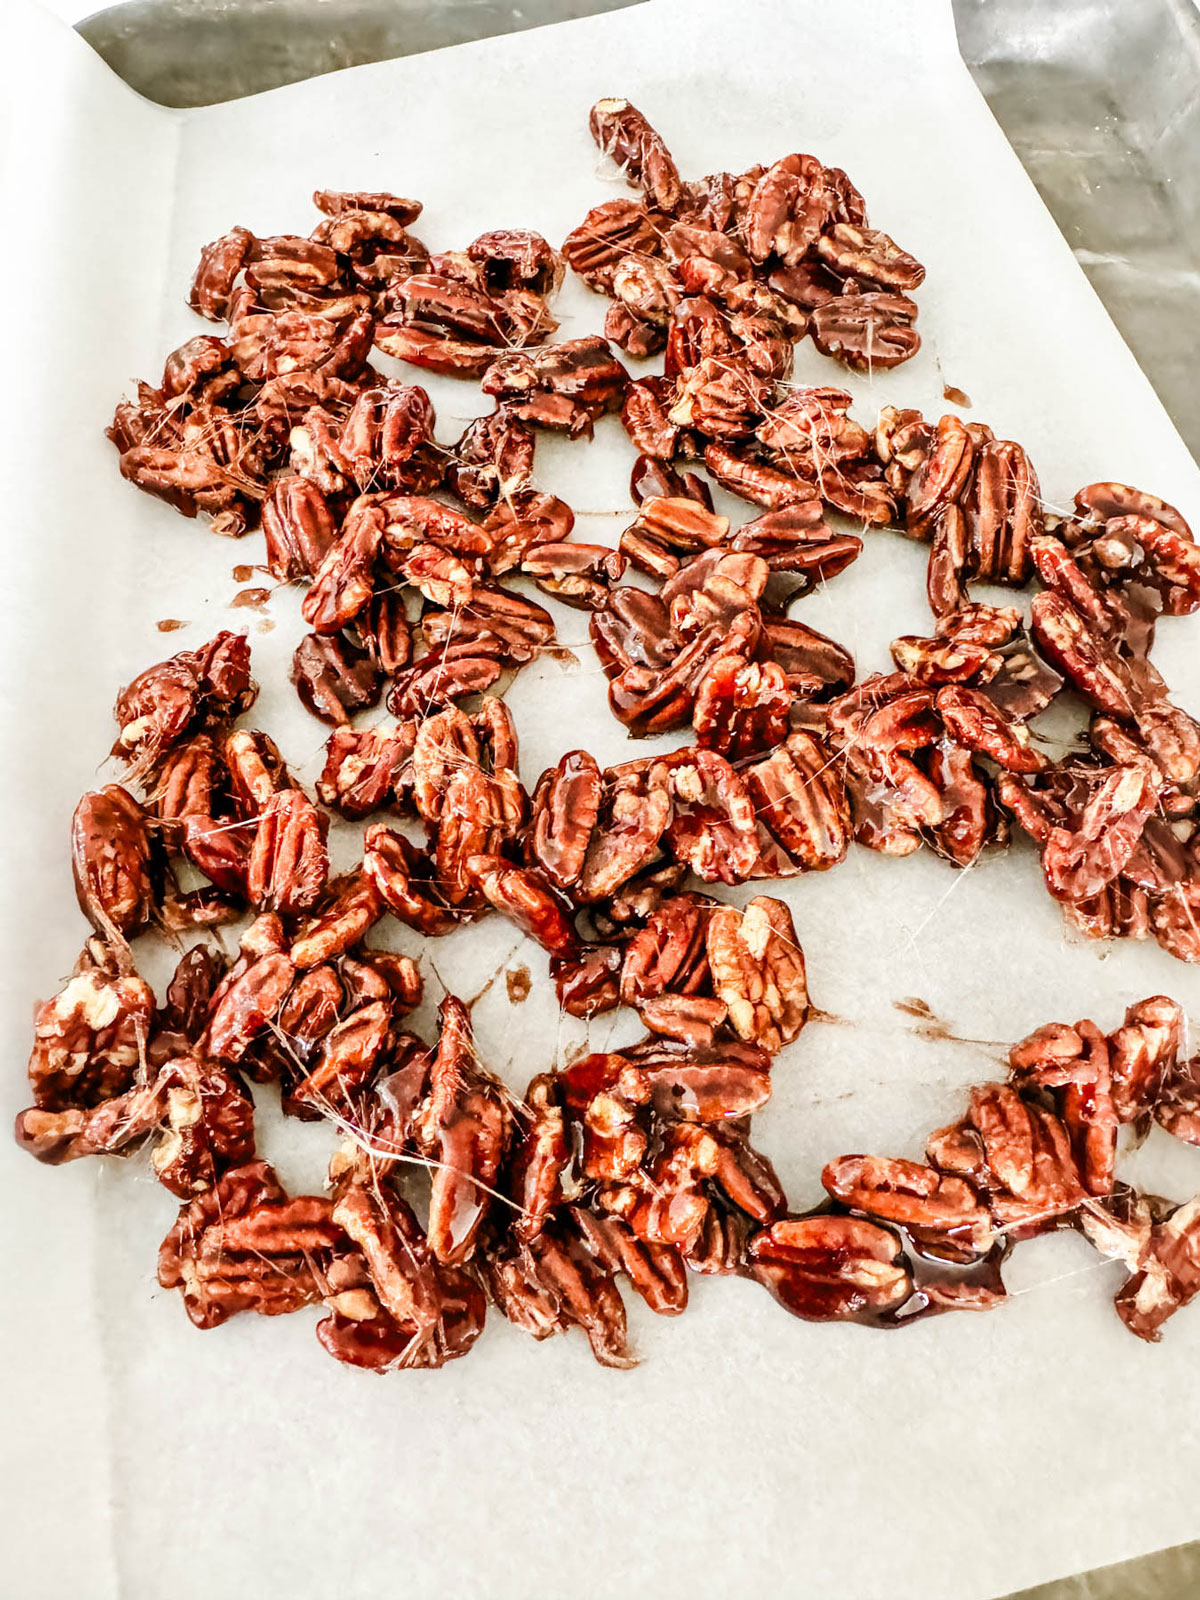 Candied spiced pecans cooling on a parchment lined baking sheet.